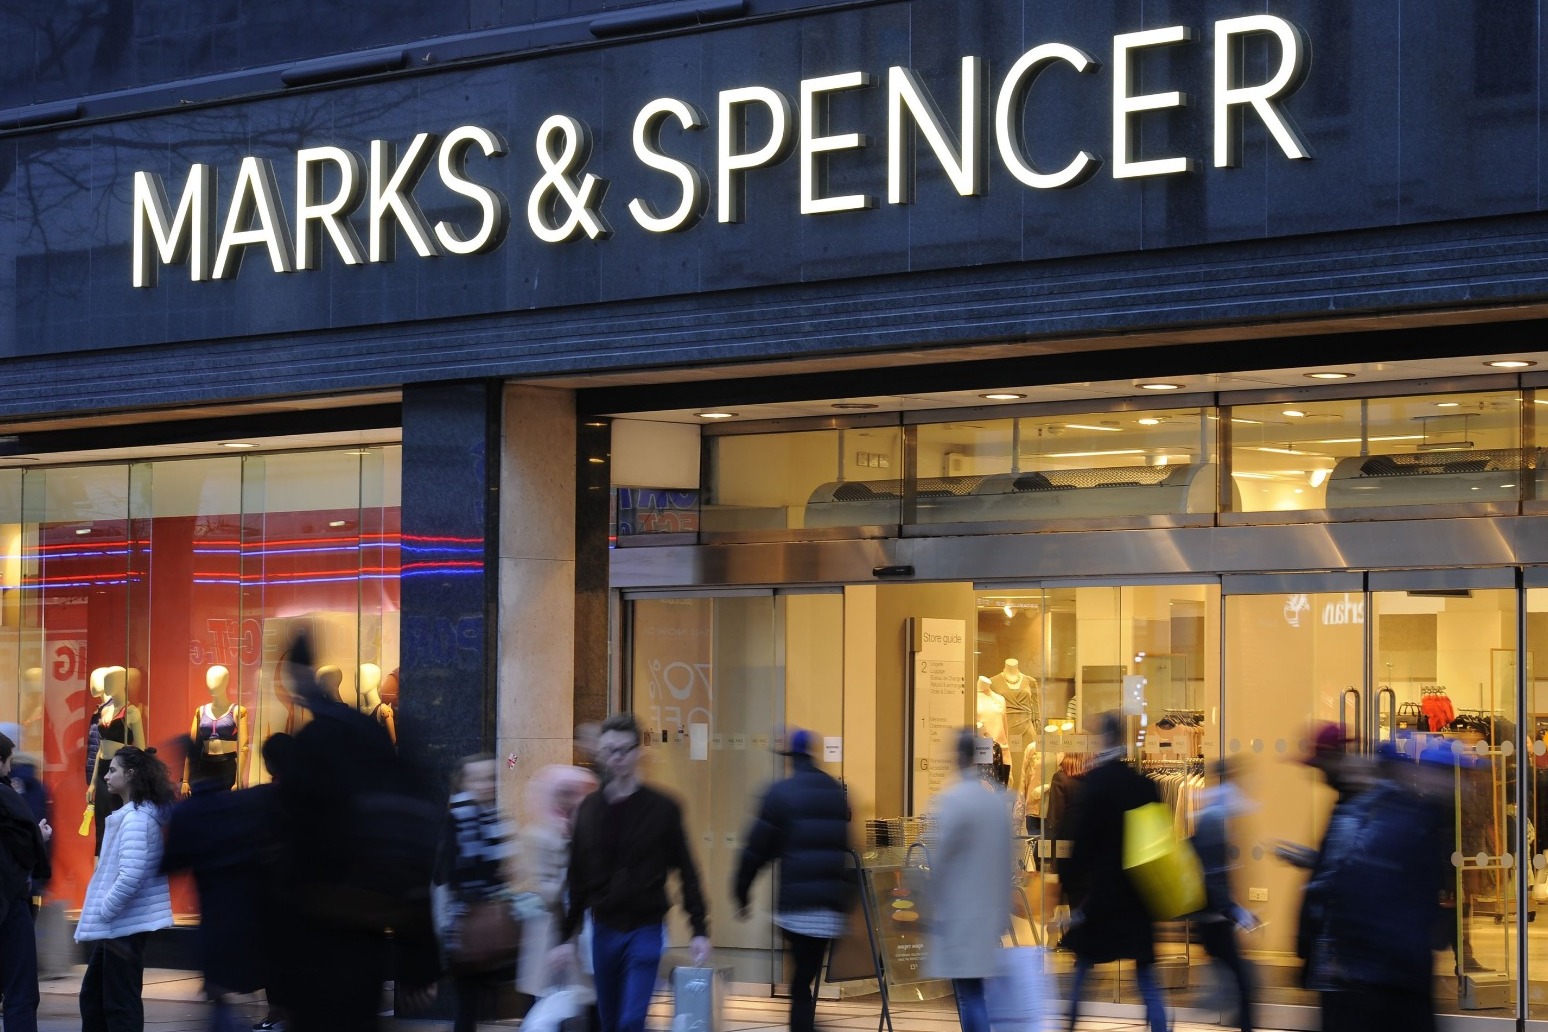 Marks & Spencer will overtake John Lewis by 2026, according to sales forecast 